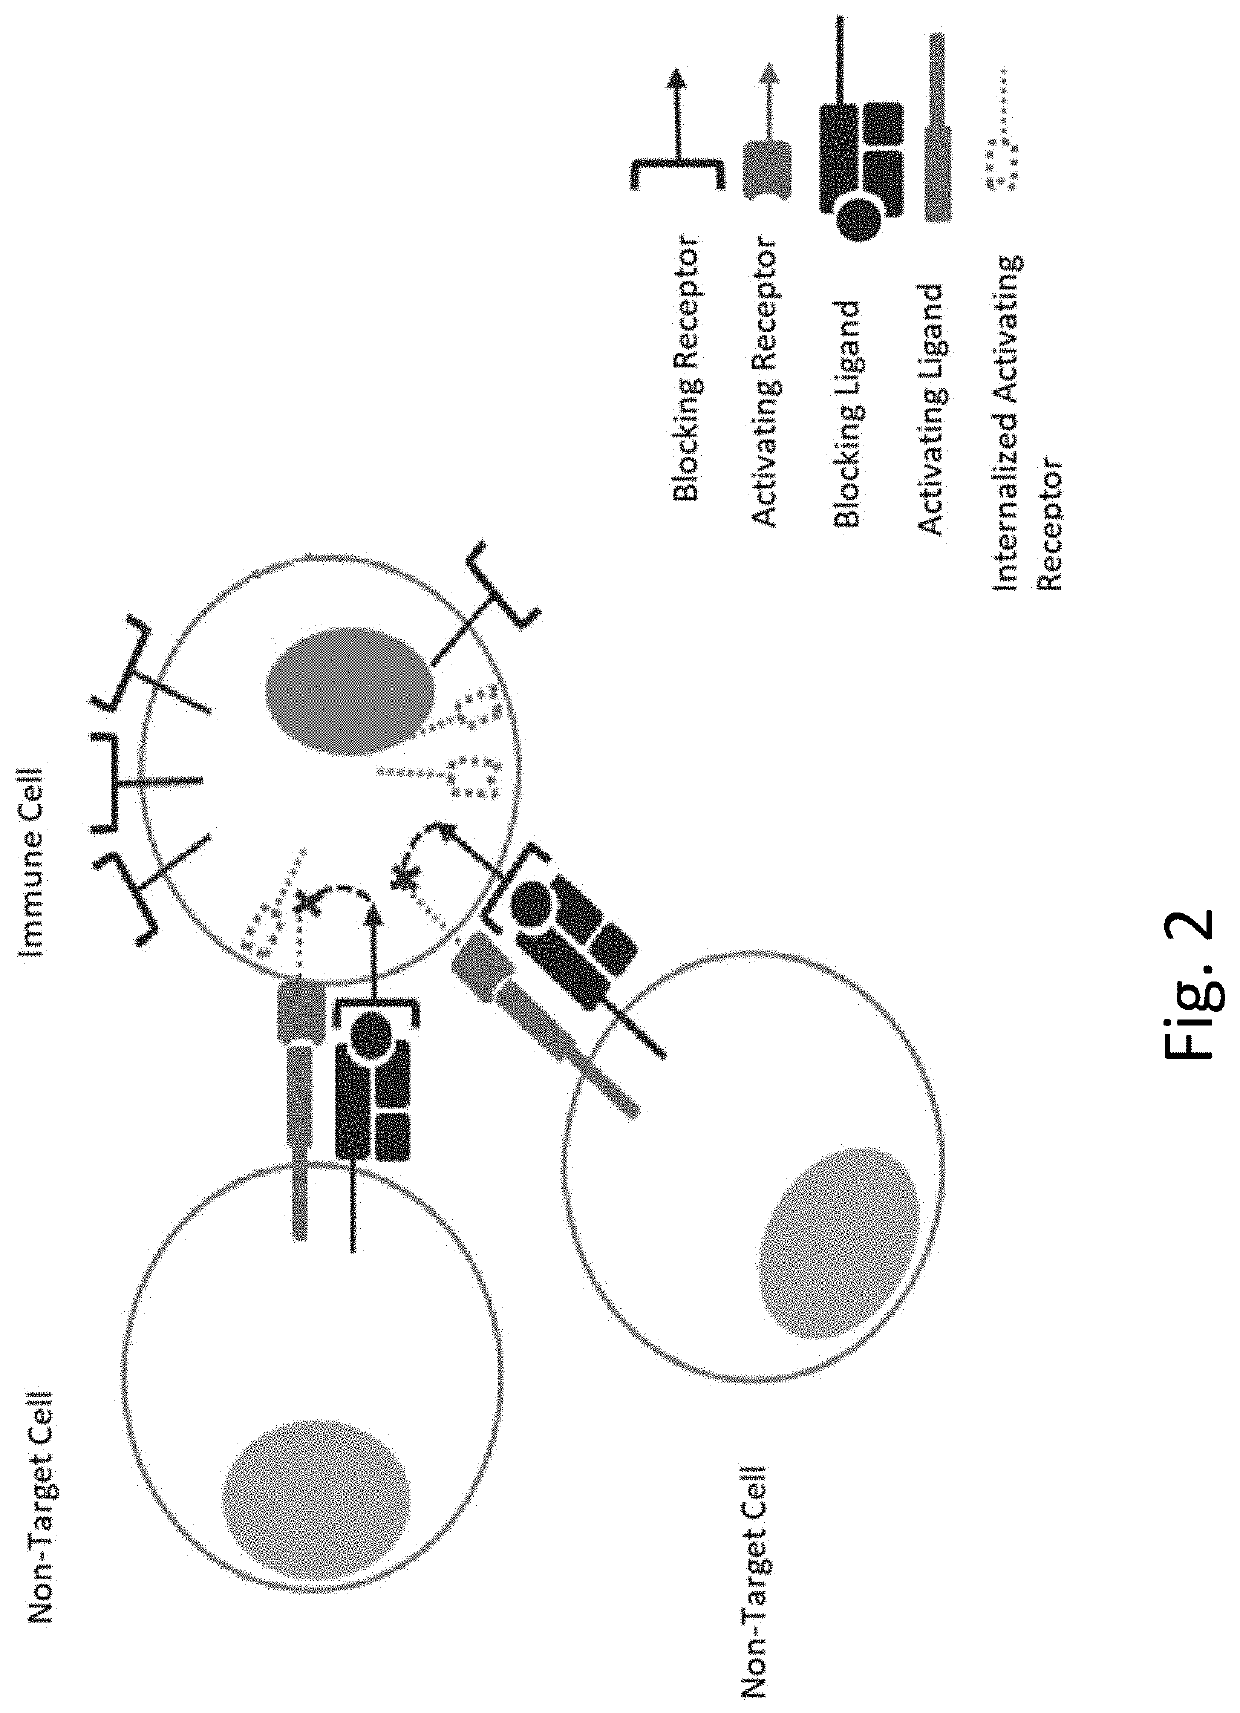 Engineered immune cells that modulate receptor expression